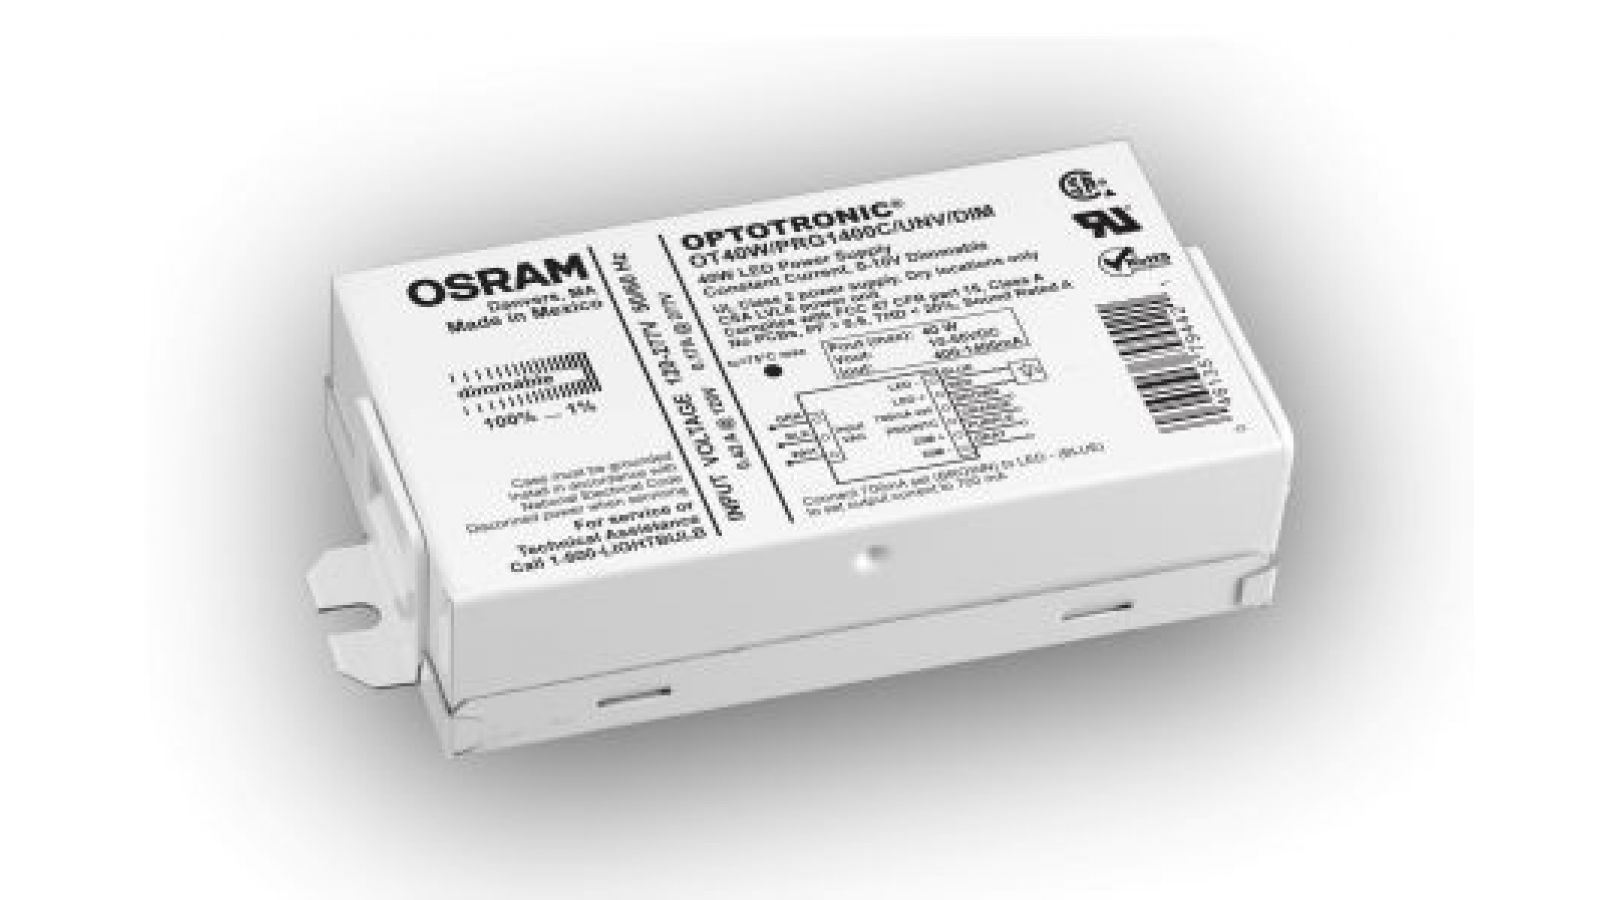 OSRAM OPTOTRONIC Programmable LED Dimming Power Supply